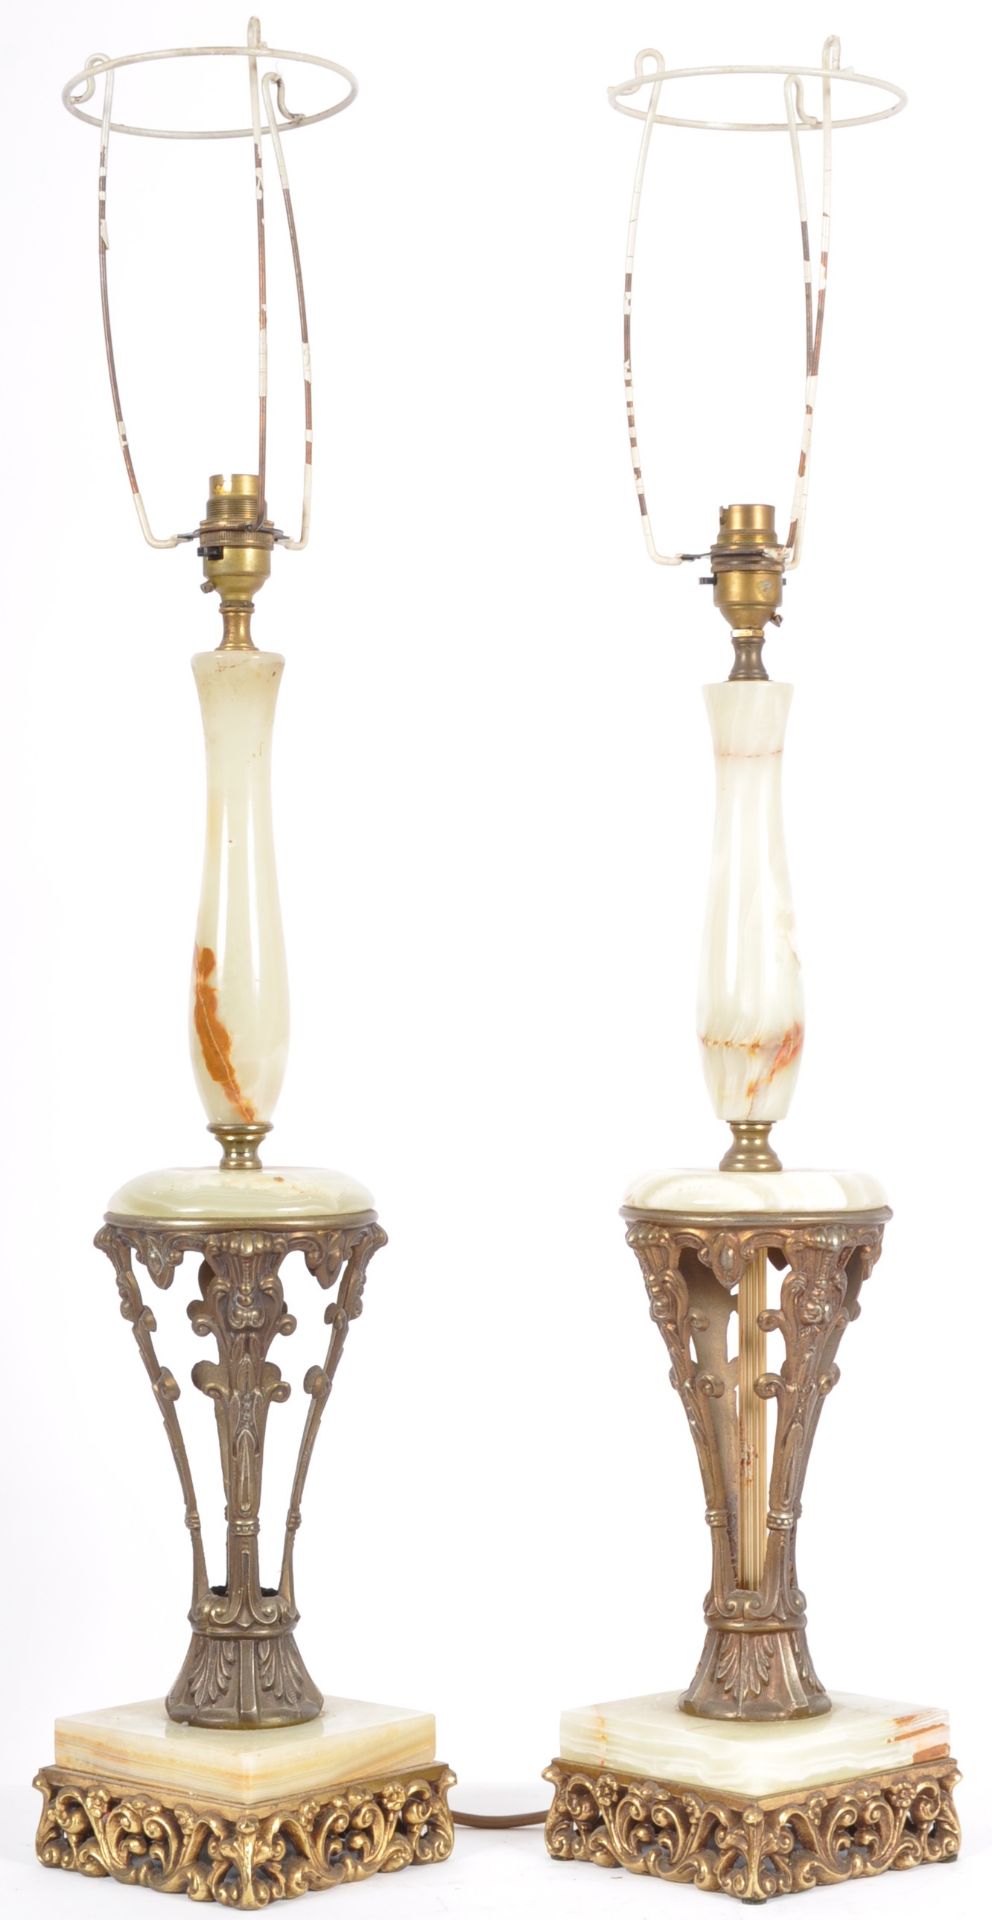 MATCHING PAIR OF VINTAGE ITALIAN INFLUENCE LAMPS - Image 2 of 8